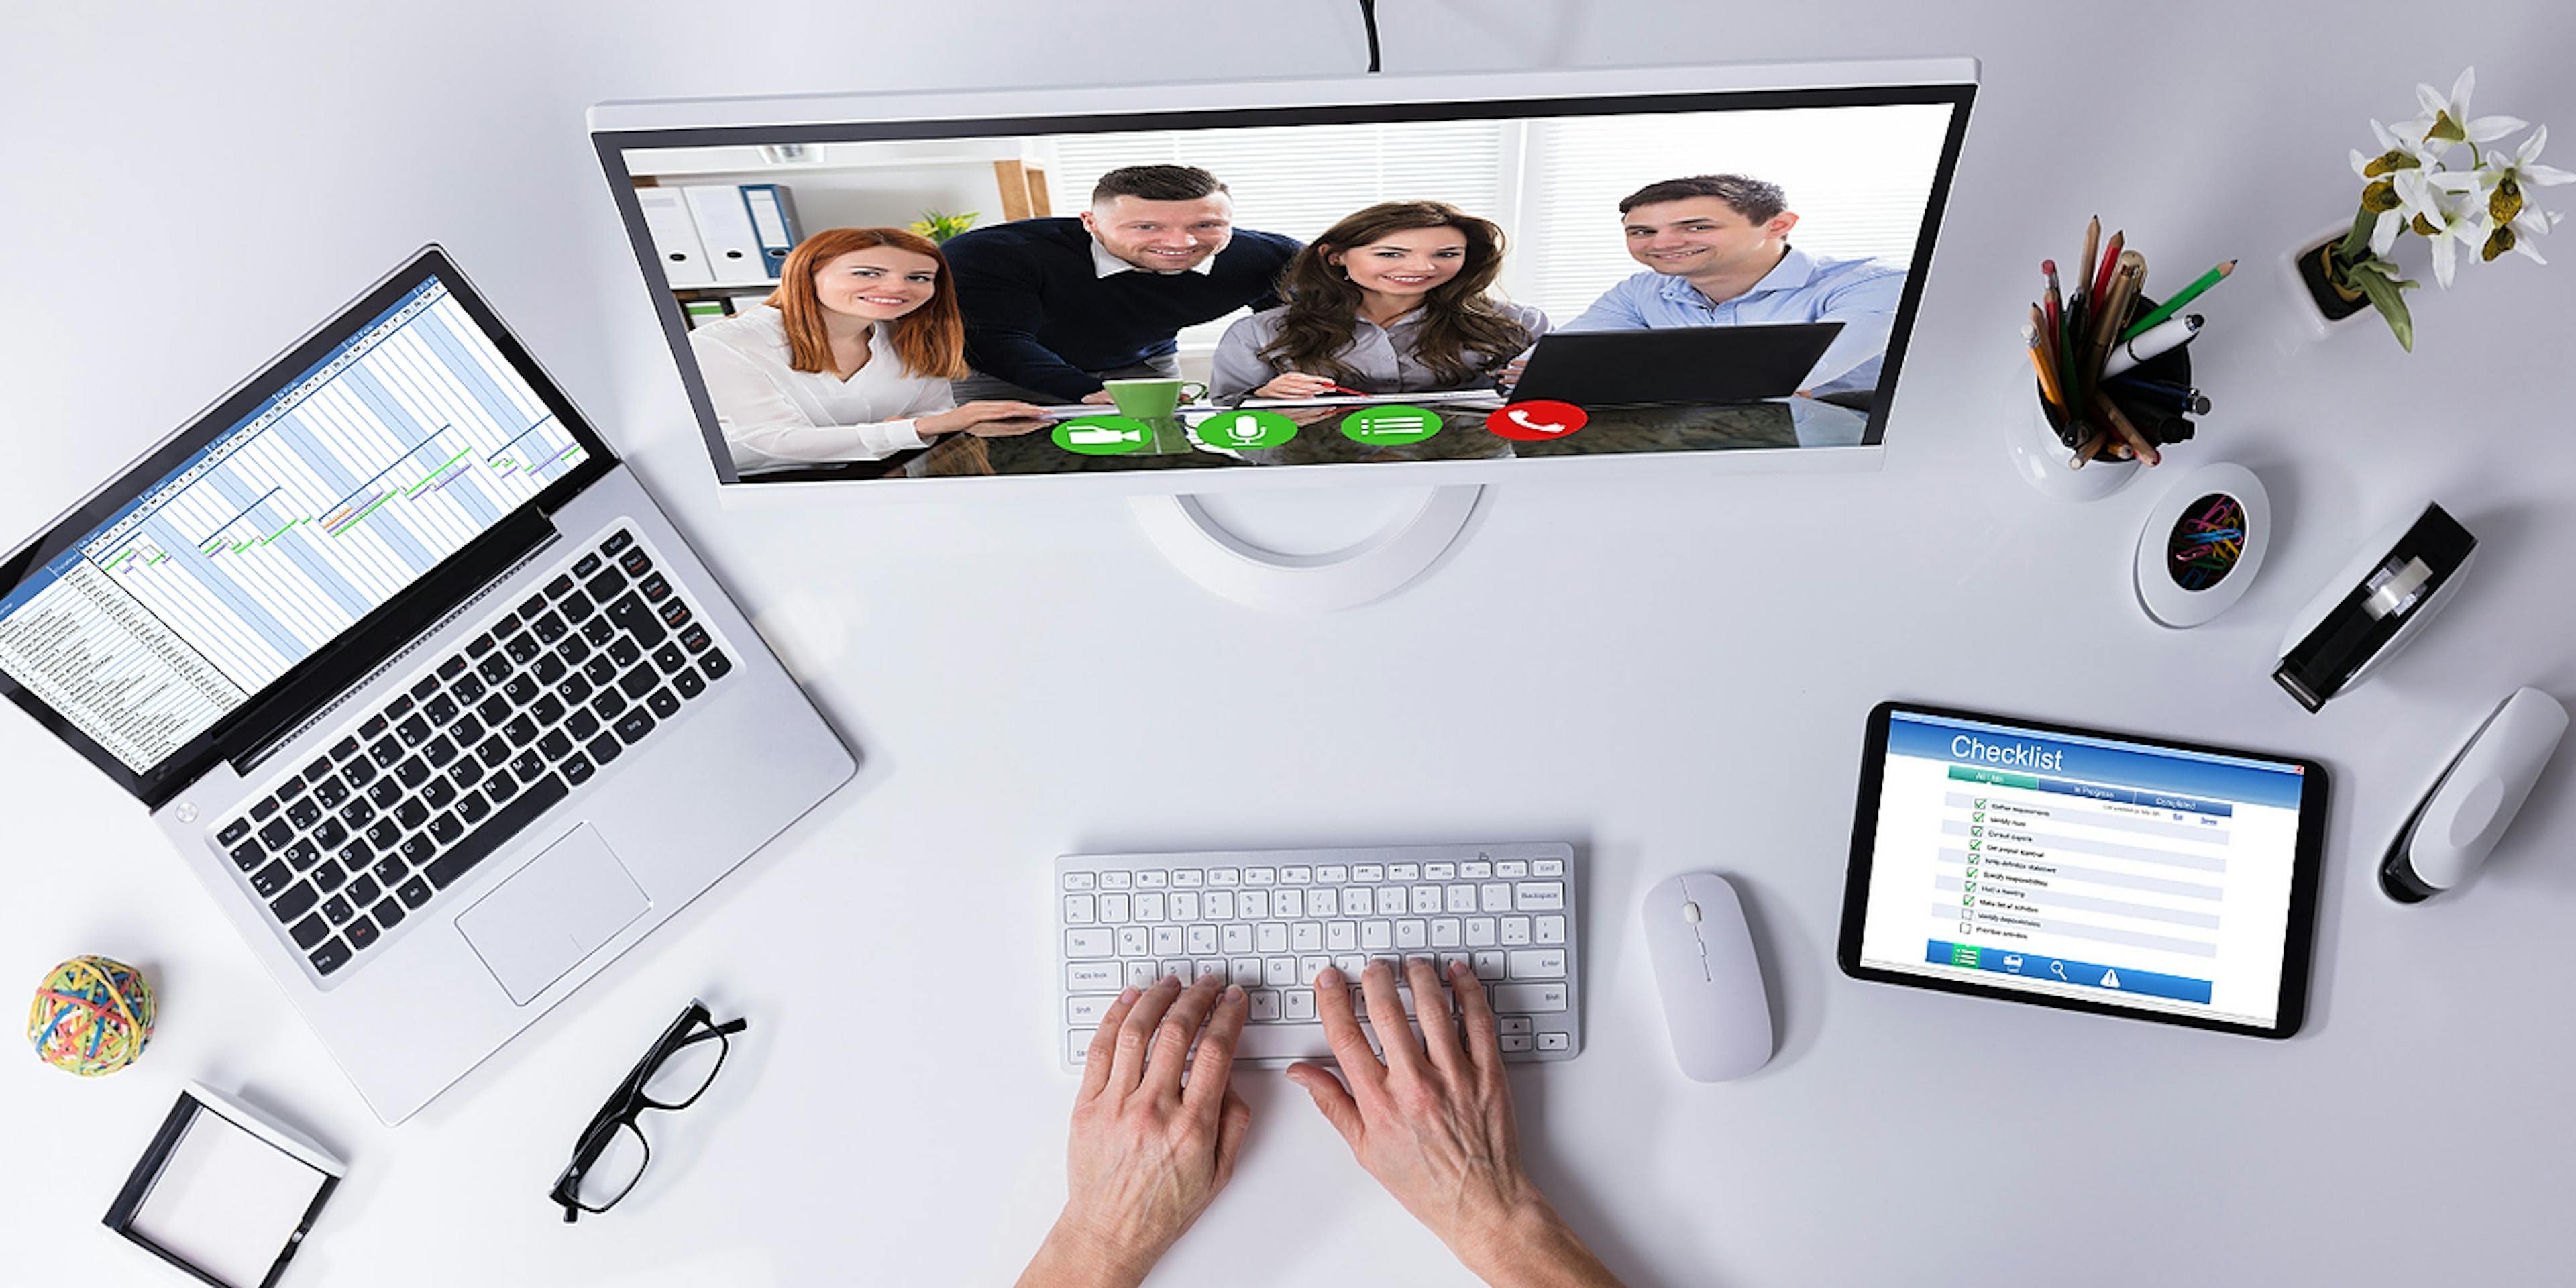 featured image - 6 Top Unified Communication Companies to Consider in 2019